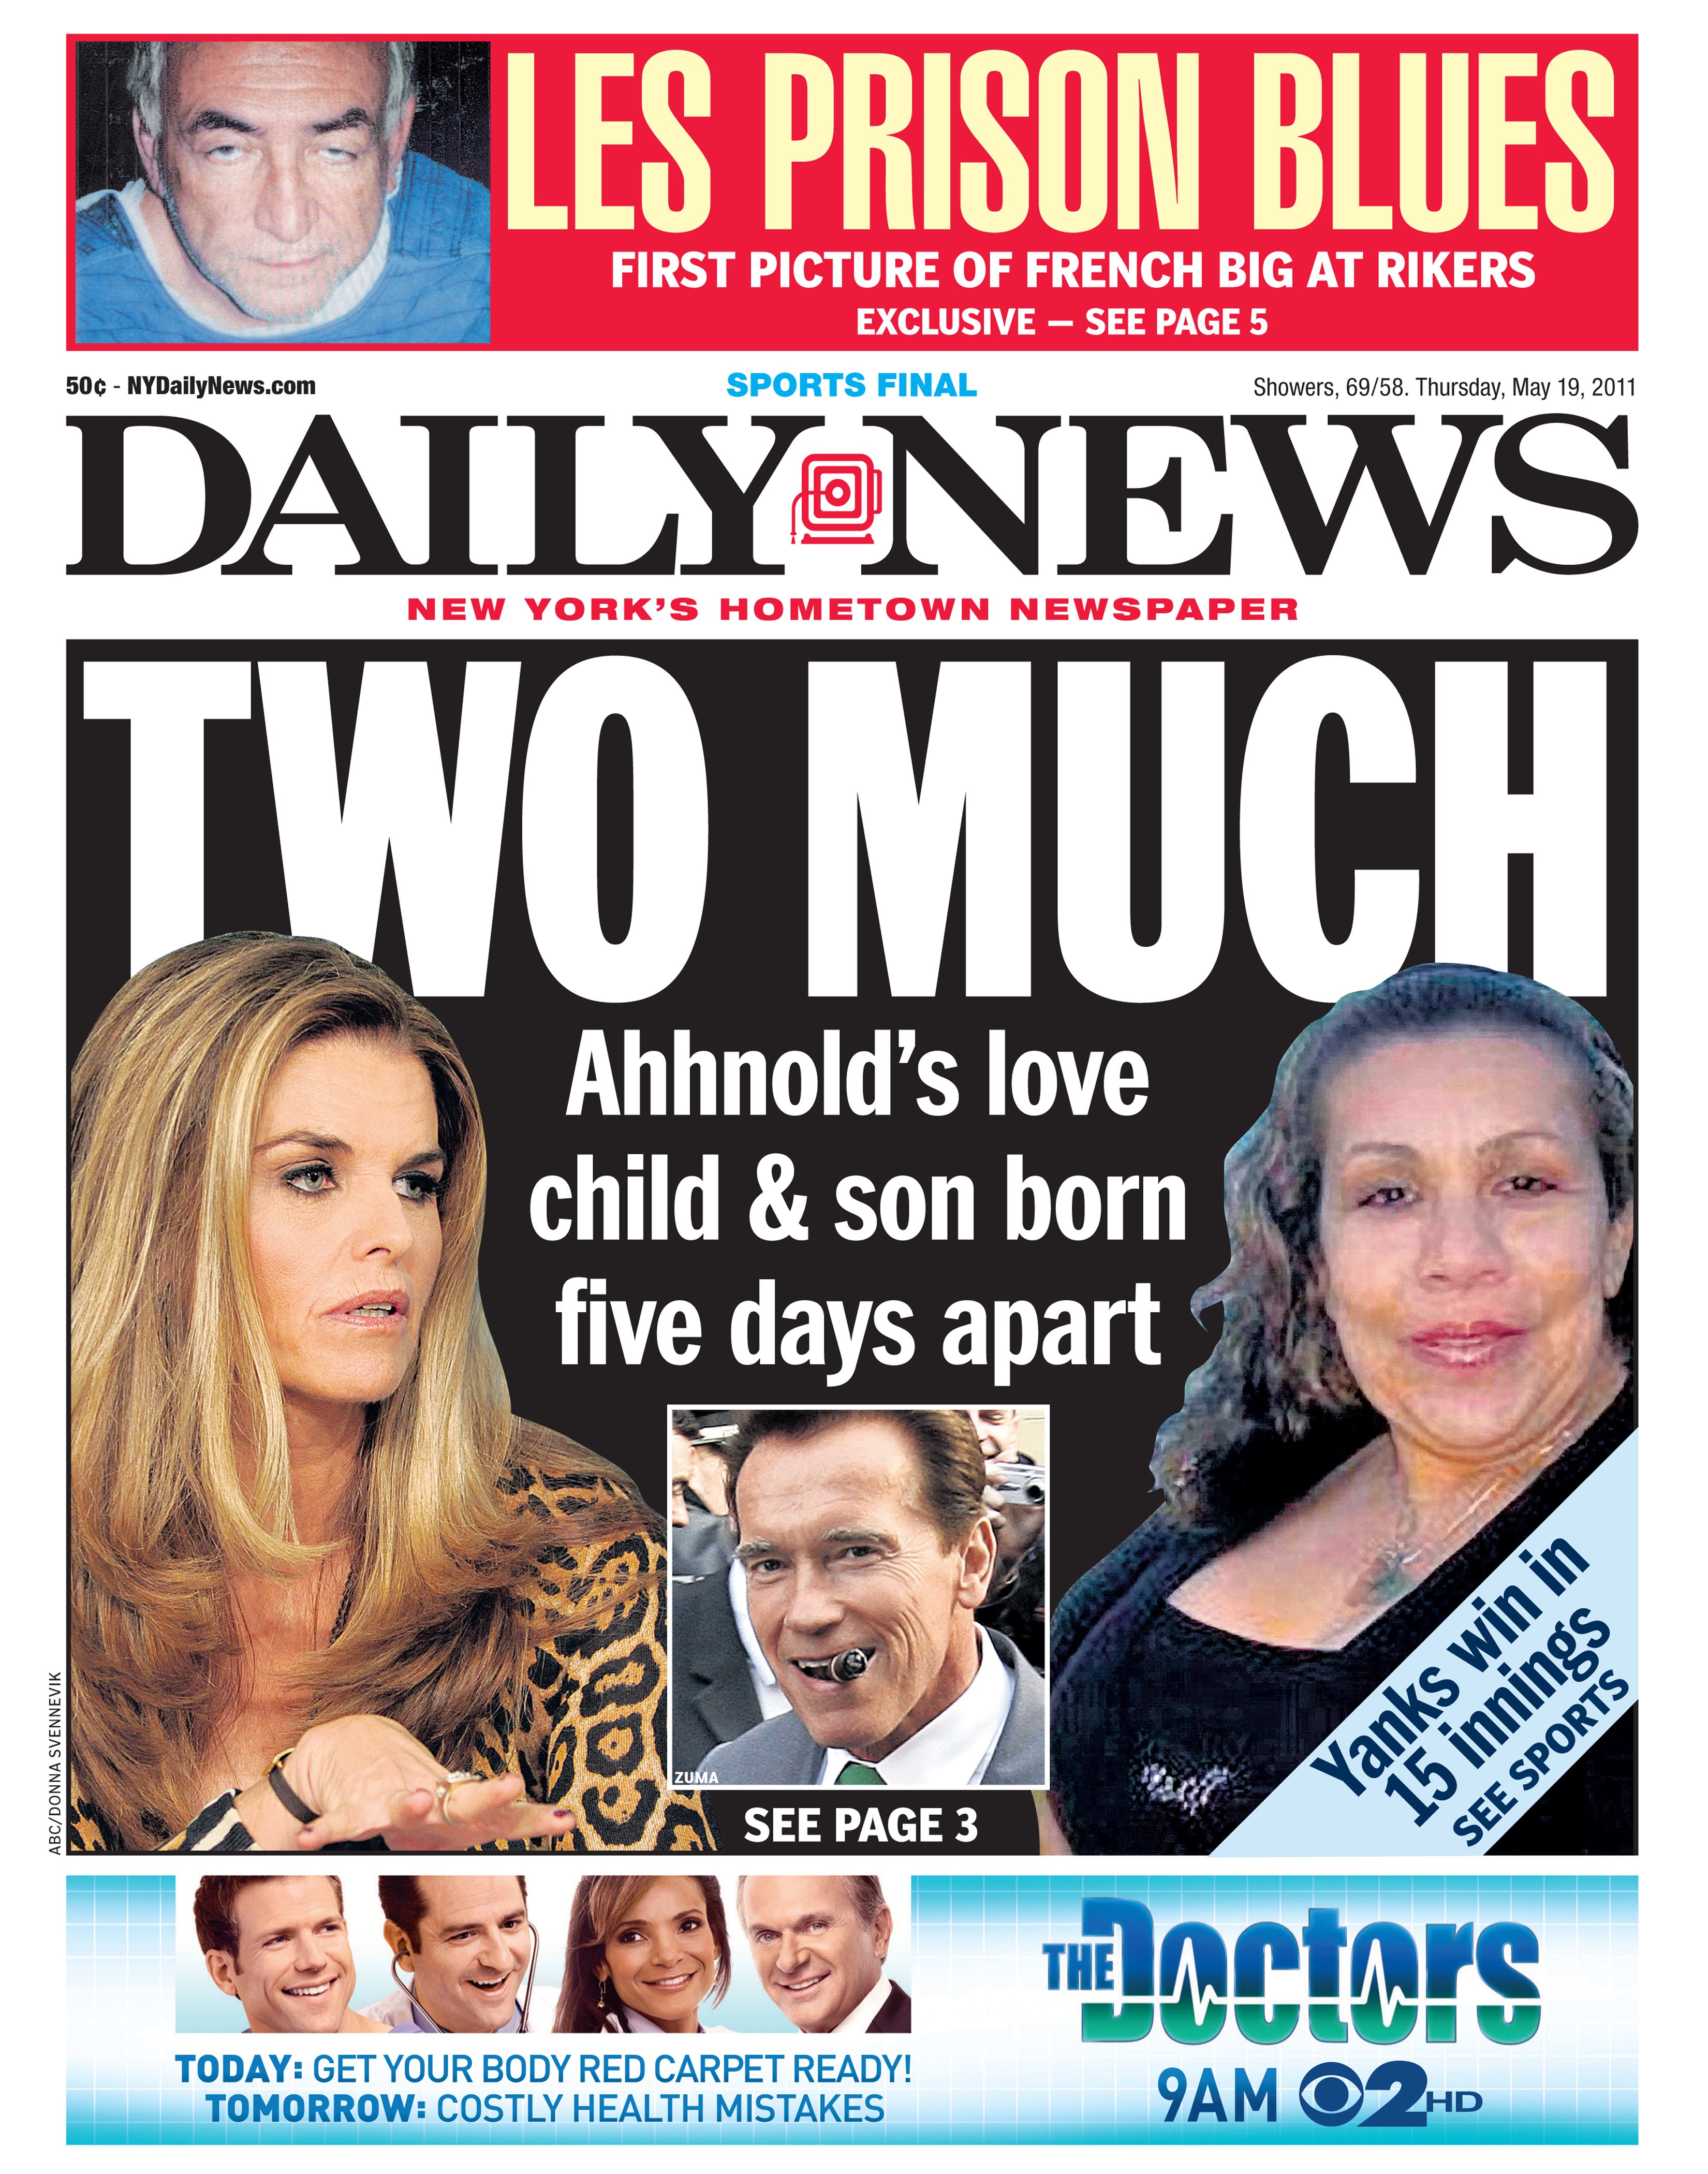 Daily News front page May 19, 2011, with the headline "TWO MUCH - Ahhnold's love child & son born five days apart." | Source: Getty Images